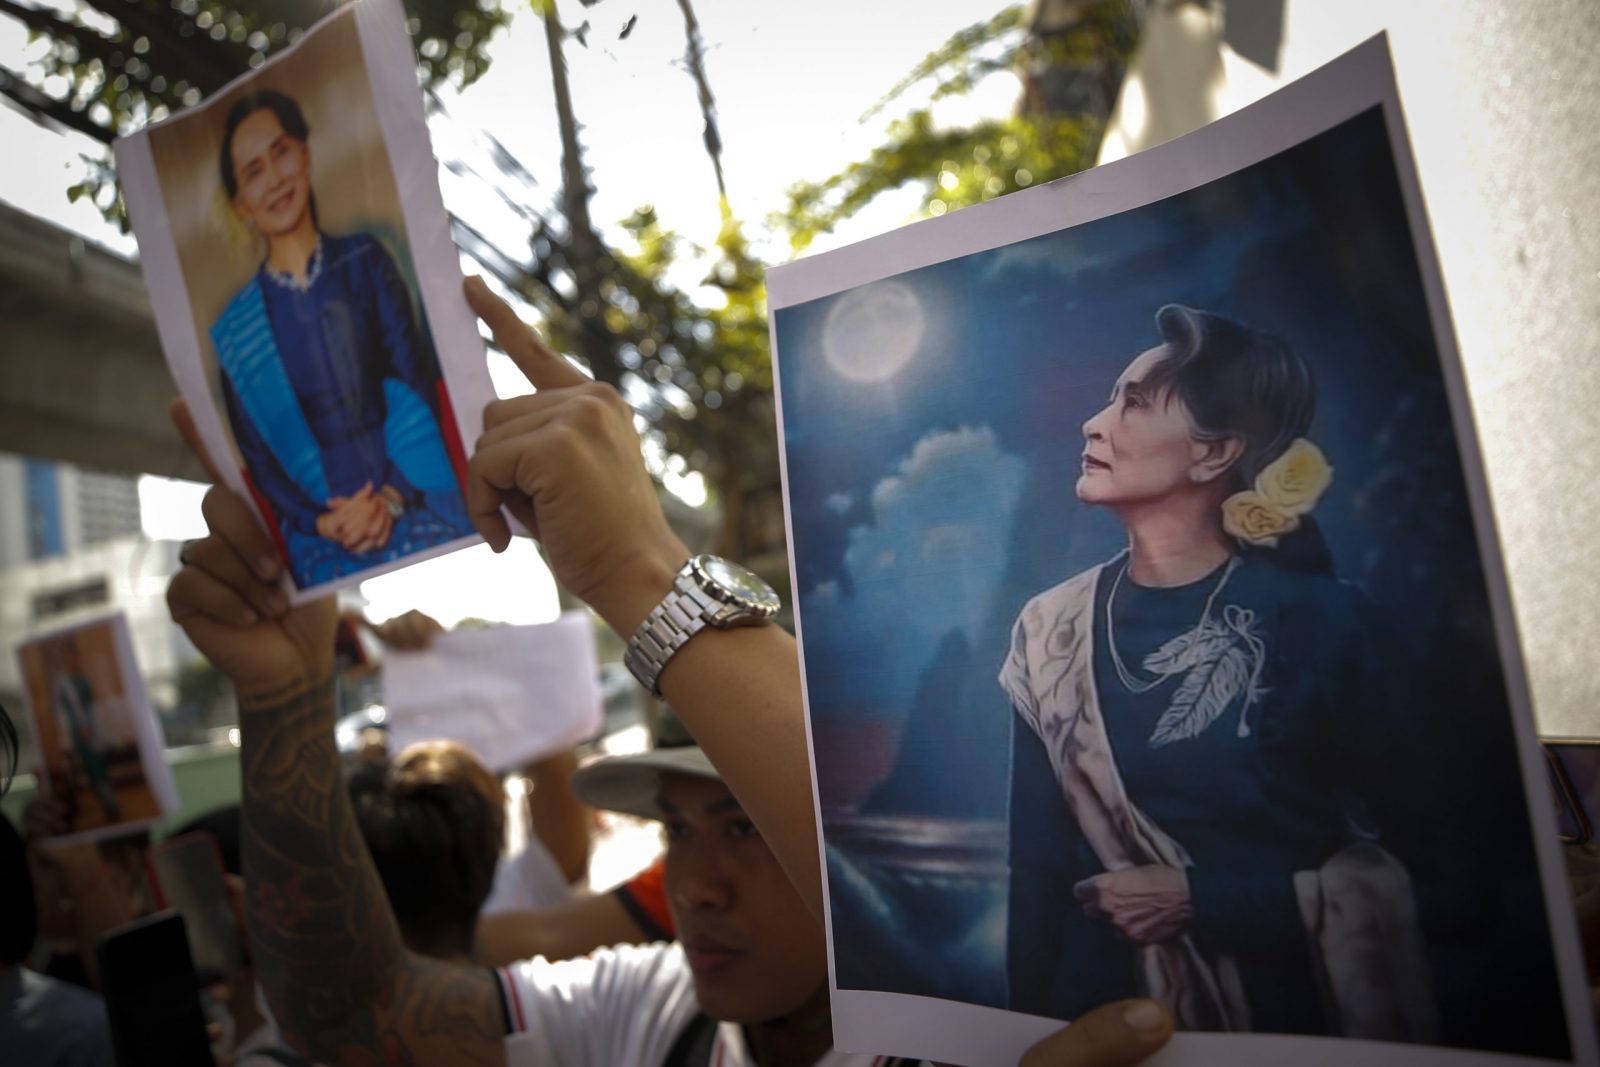 epa10373651 Myanmar migrant workers living in Thailand hold pictures of Myanmar democracy icon Aung San Suu Kyi at a rally outside the Myanmar embassy in Bangkok, Thailand, 19 December 2022. Myanmar migrant workers rallied outside the Myanmar embassy to mark the International Migrants Day which was observed the previous day on 18 December, to protest against Myanmar's State Administration Council and in support of Aung San Suu Kyi, the 1991 Nobel Peace Prize laureate and former State Counsellor of Myanmar and Minister of Foreign Affairs.  EPA/DIEGO AZUBEL